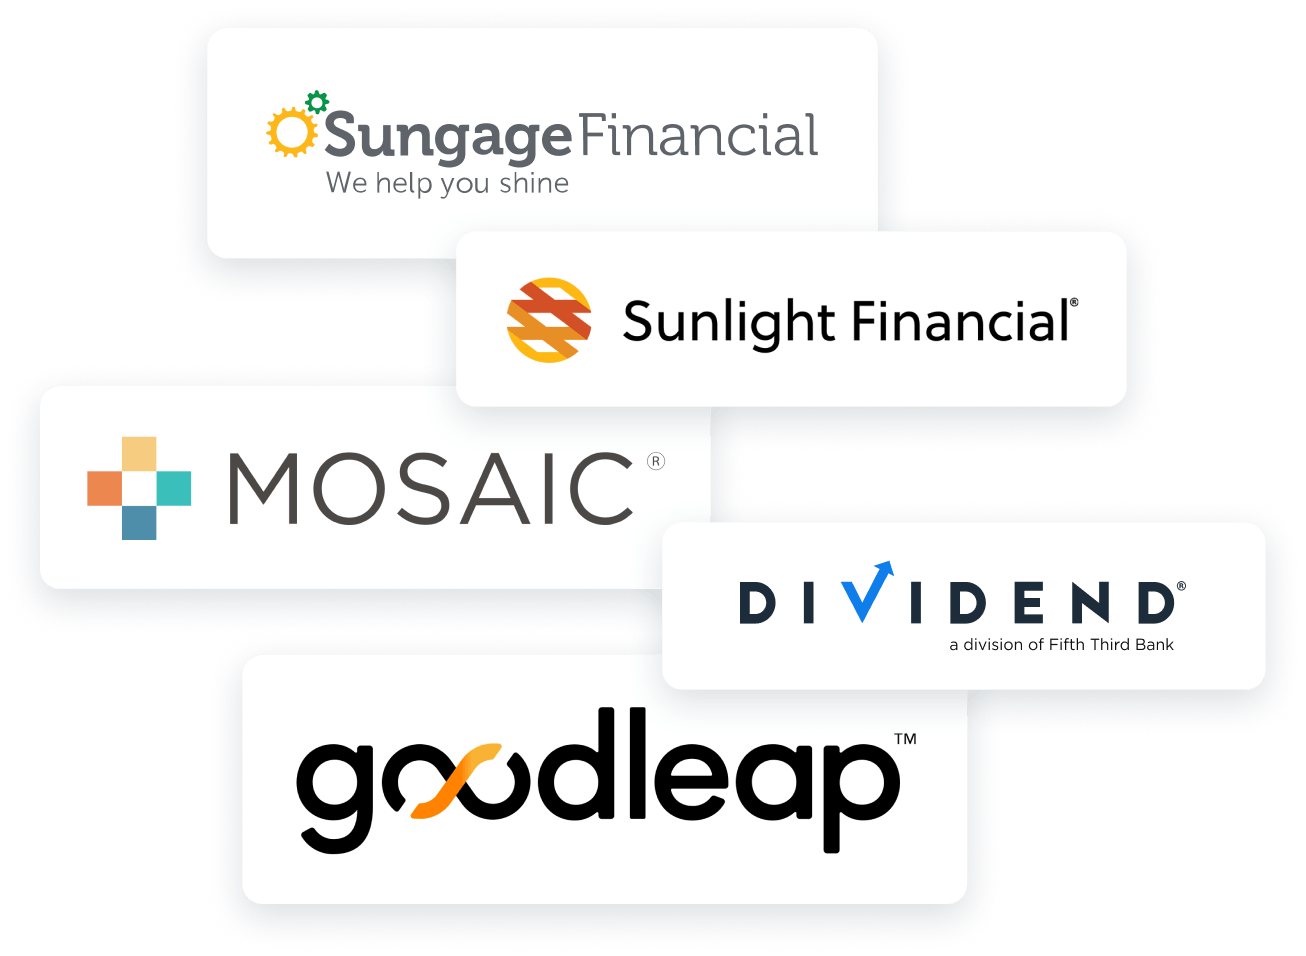 Enerflo integrates with the Top 5 Solar Lenders and has the deepest integrations on the market, making lending easy and enabling reps to get their customers to NTP faster -- all through Lendflo.